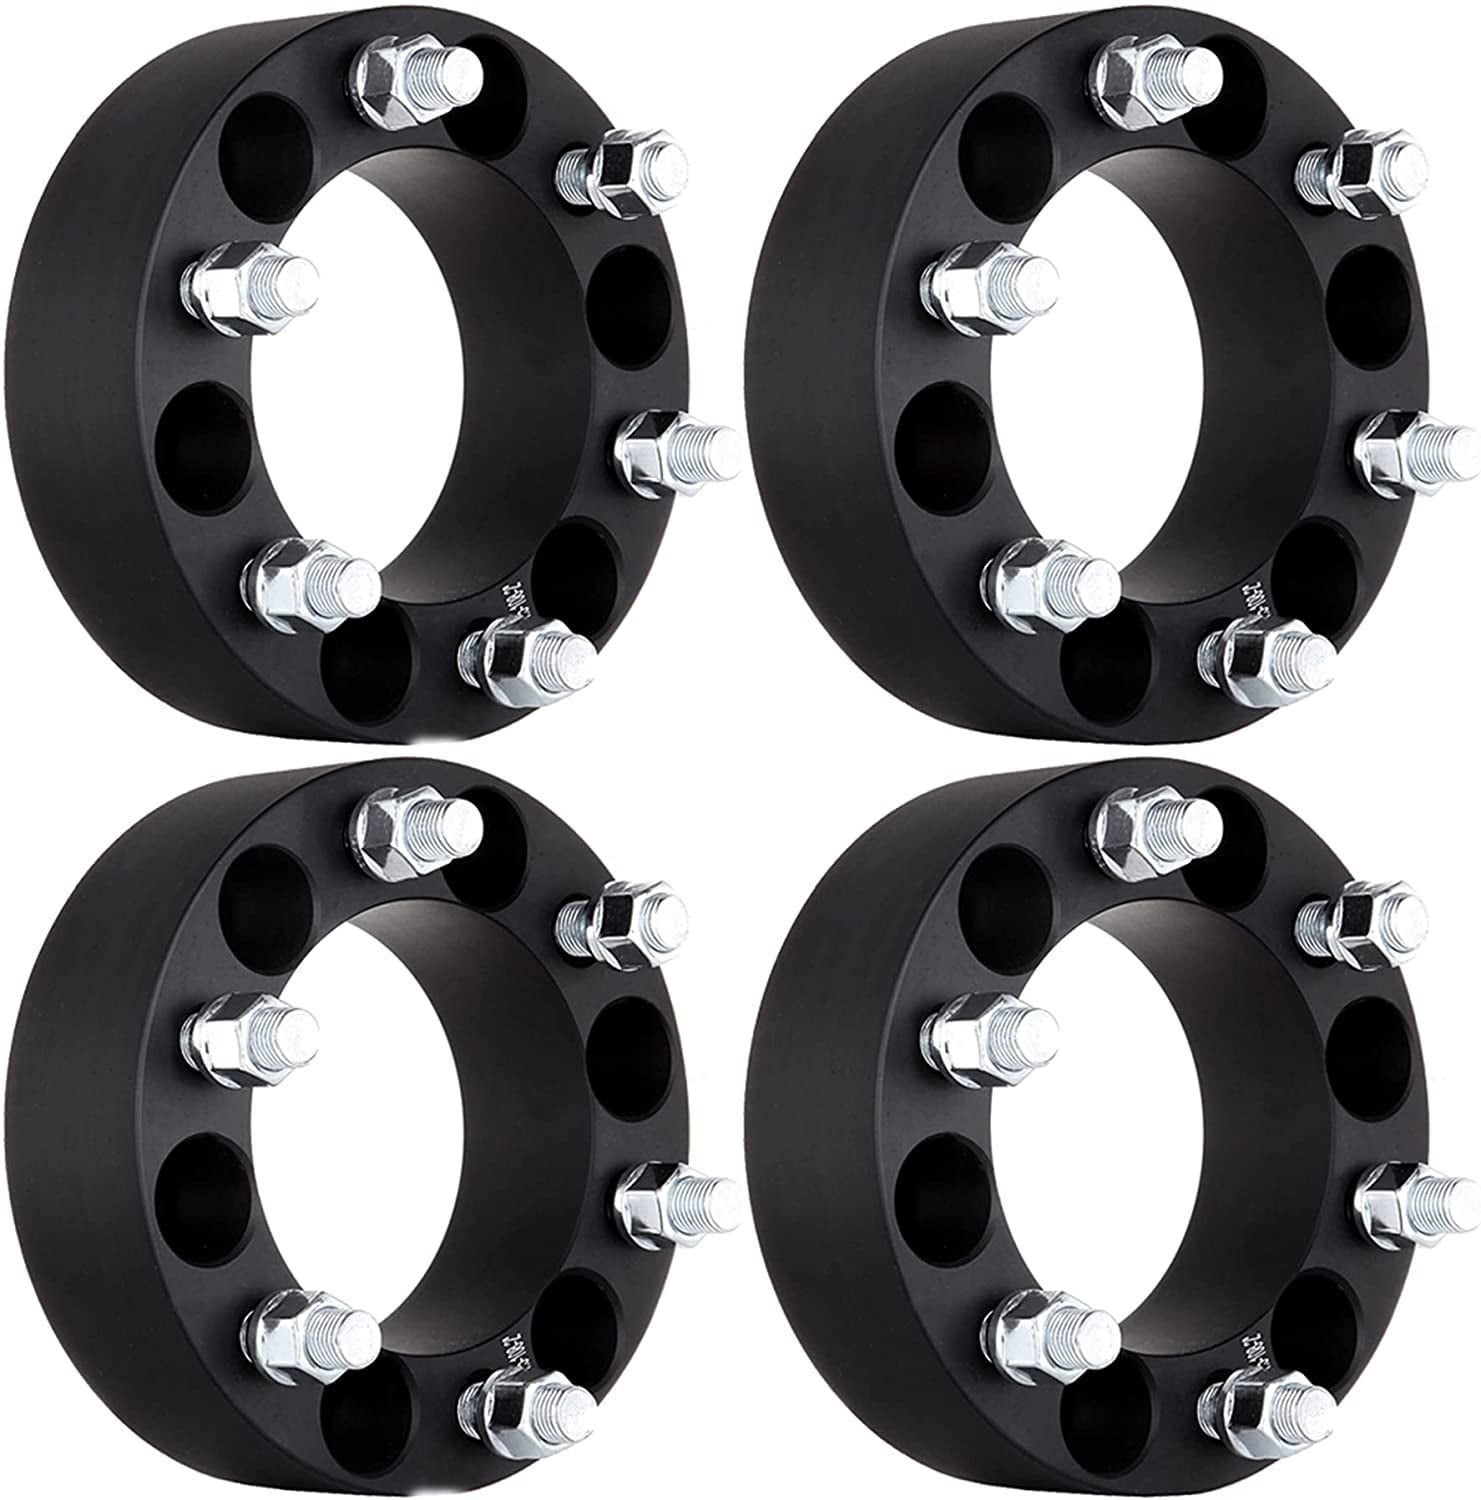 SCITOO 6 Lug Hubcentric Wheel Spacer 2 6x5.5 6x139.7mm 6 Lug Wheel SPACERS ADAPTERS Fit for 2003-2014 GMC Savana Yukon Sierra 1500 Chevy Express 1500 Suburban Tahoe 